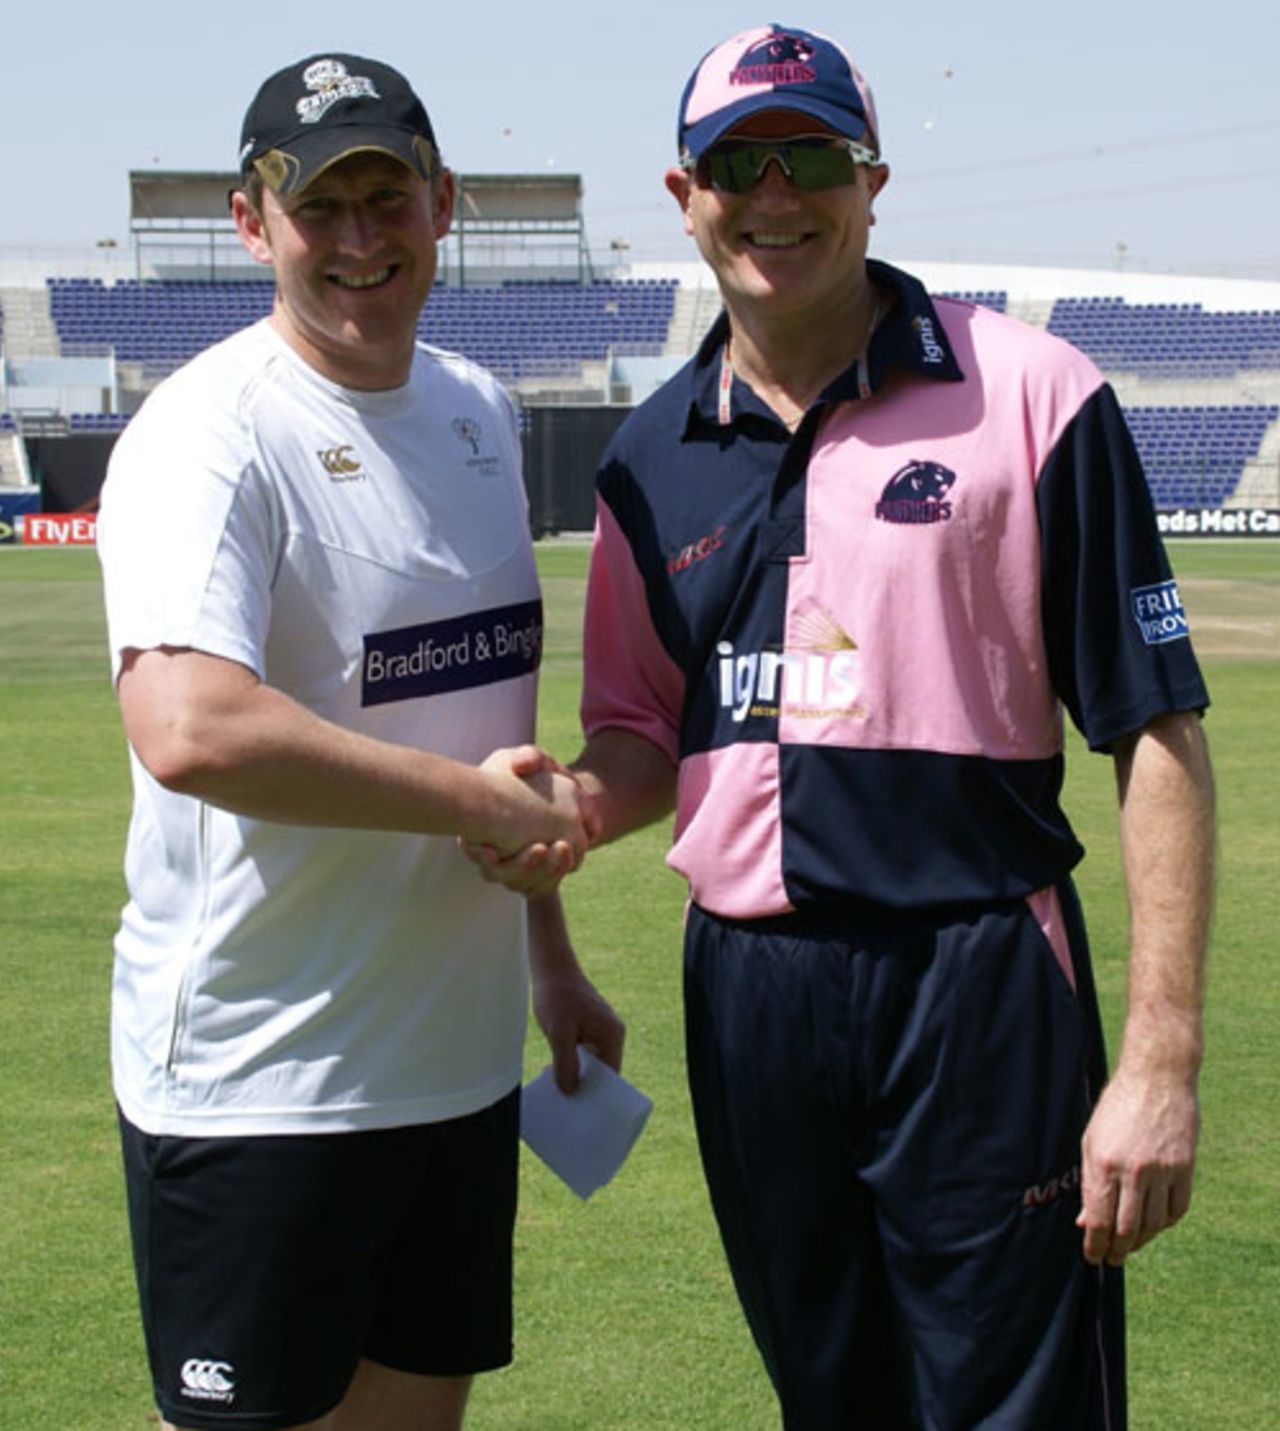 Anthony McGrath and Shaun Udal at the toss, Middlesex v Yorkshire, Pro Arch Trophy, Abu Dhabi, March 20, 2009